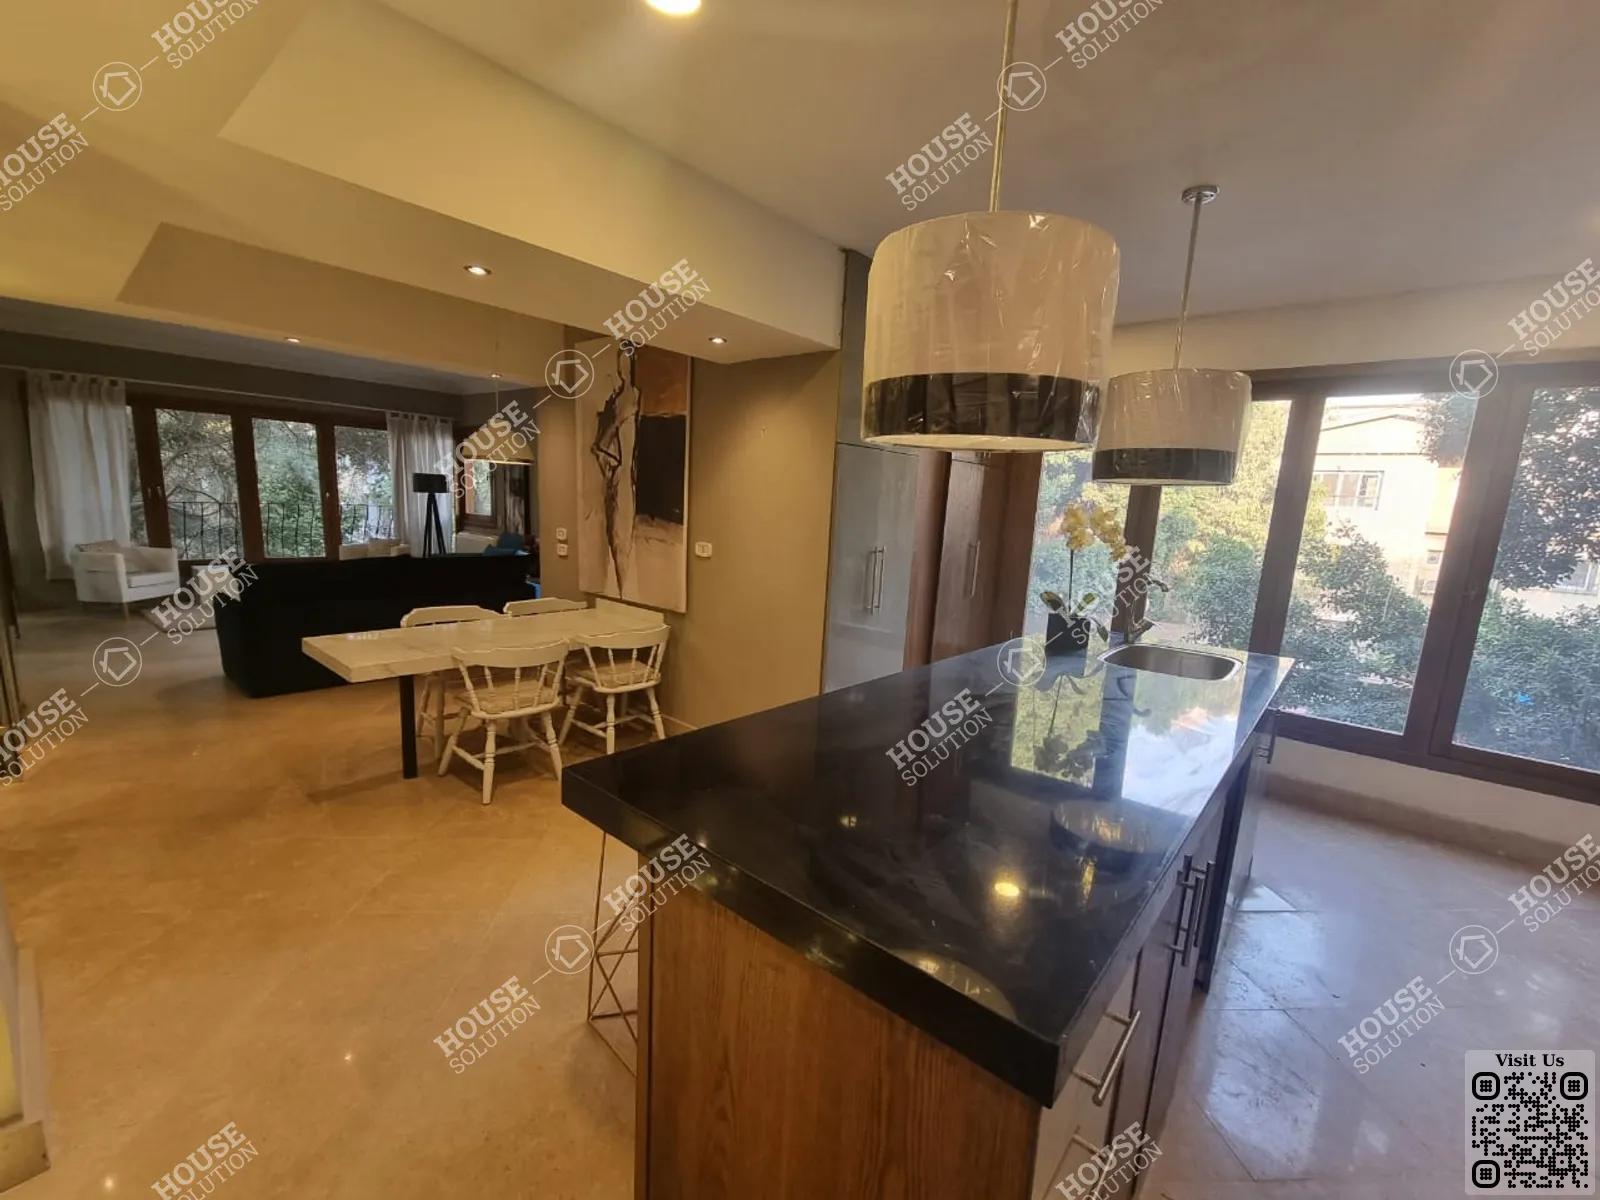 KITCHEN  @ Apartments For Rent In Maadi Maadi Degla Area: 250 m² consists of 4 Bedrooms 3 Bathrooms Modern furnished 5 stars #5621-1